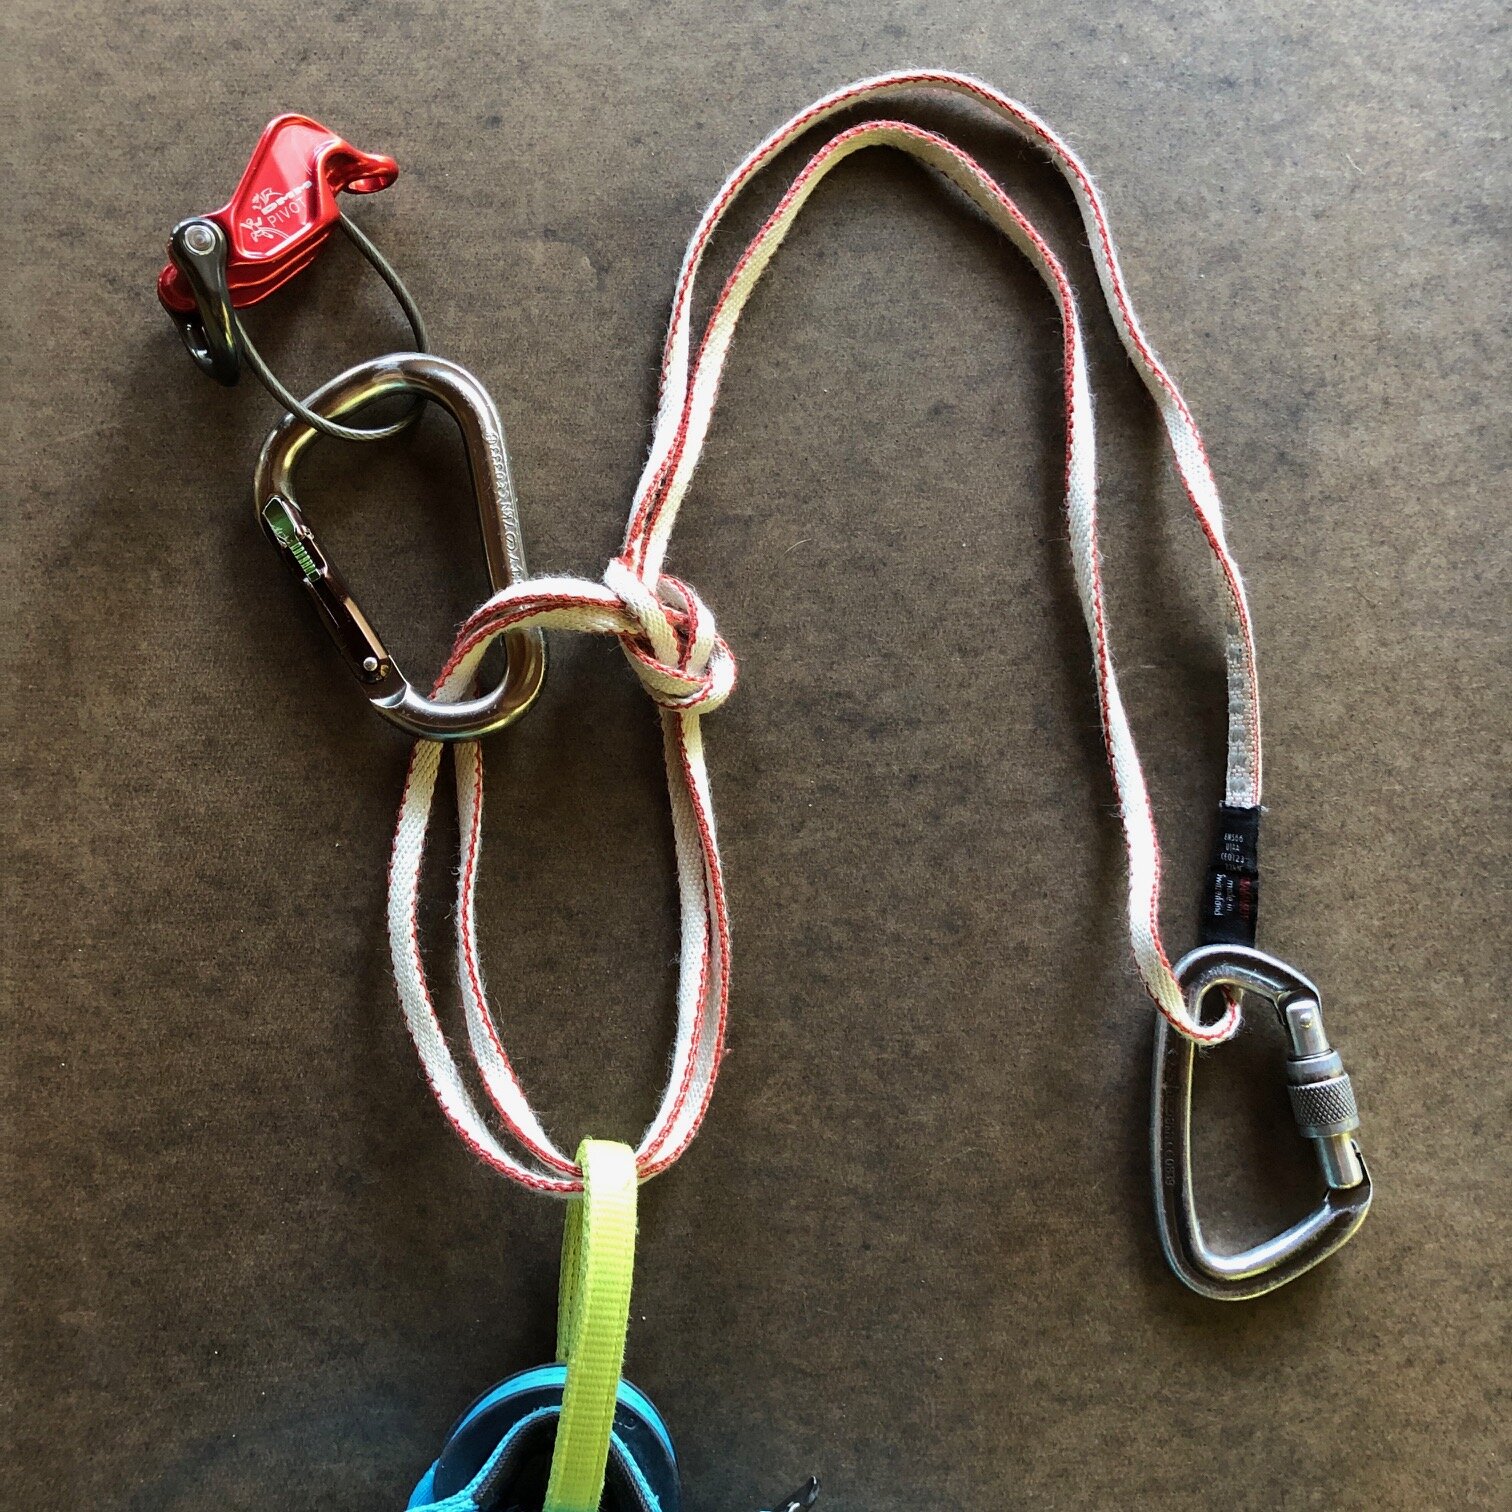 Double loop bowline for a rappel tether — Alpine Savvy